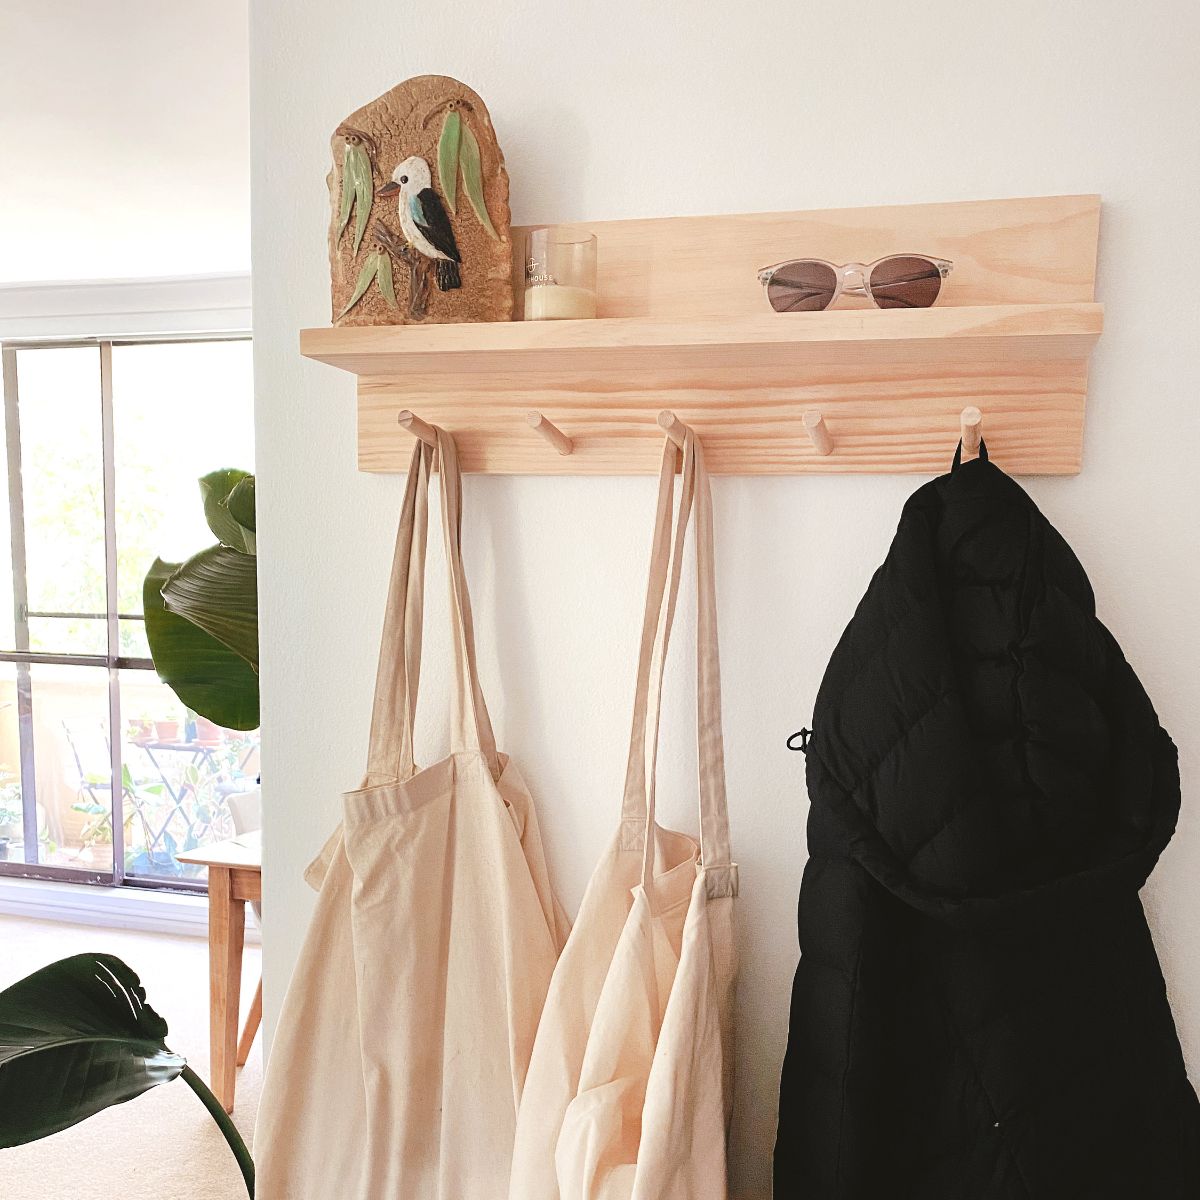 55cm Pine Wood Coat Rack Entryway Organiser Shelf with no mail holder. This is an actual customer photo at their home